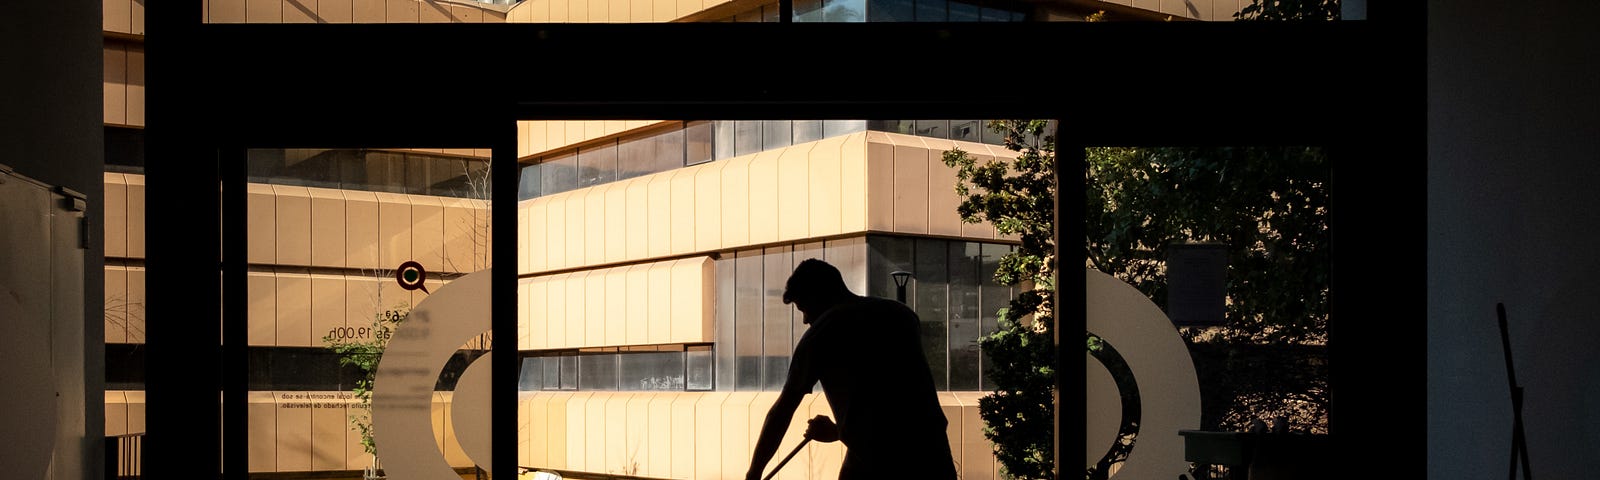 A person mopping, silhouetted.